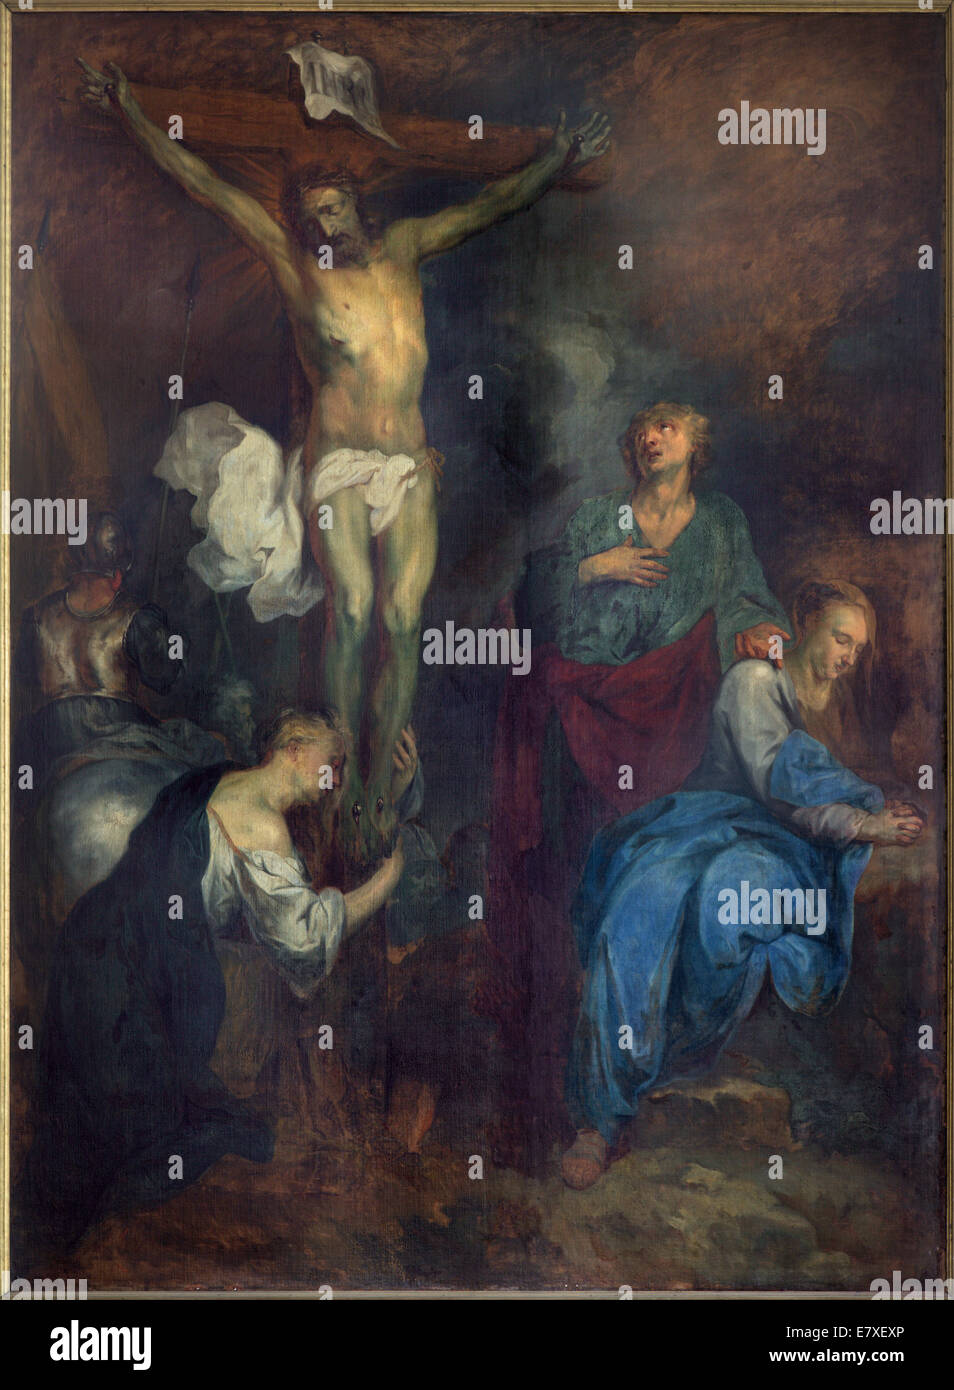 BRUGES, BELGIUM - JUNE 12, 2014: The Crucifixion by L. Dedeyster (1634)  in st. Jacobs church (Jakobskerk). Stock Photo